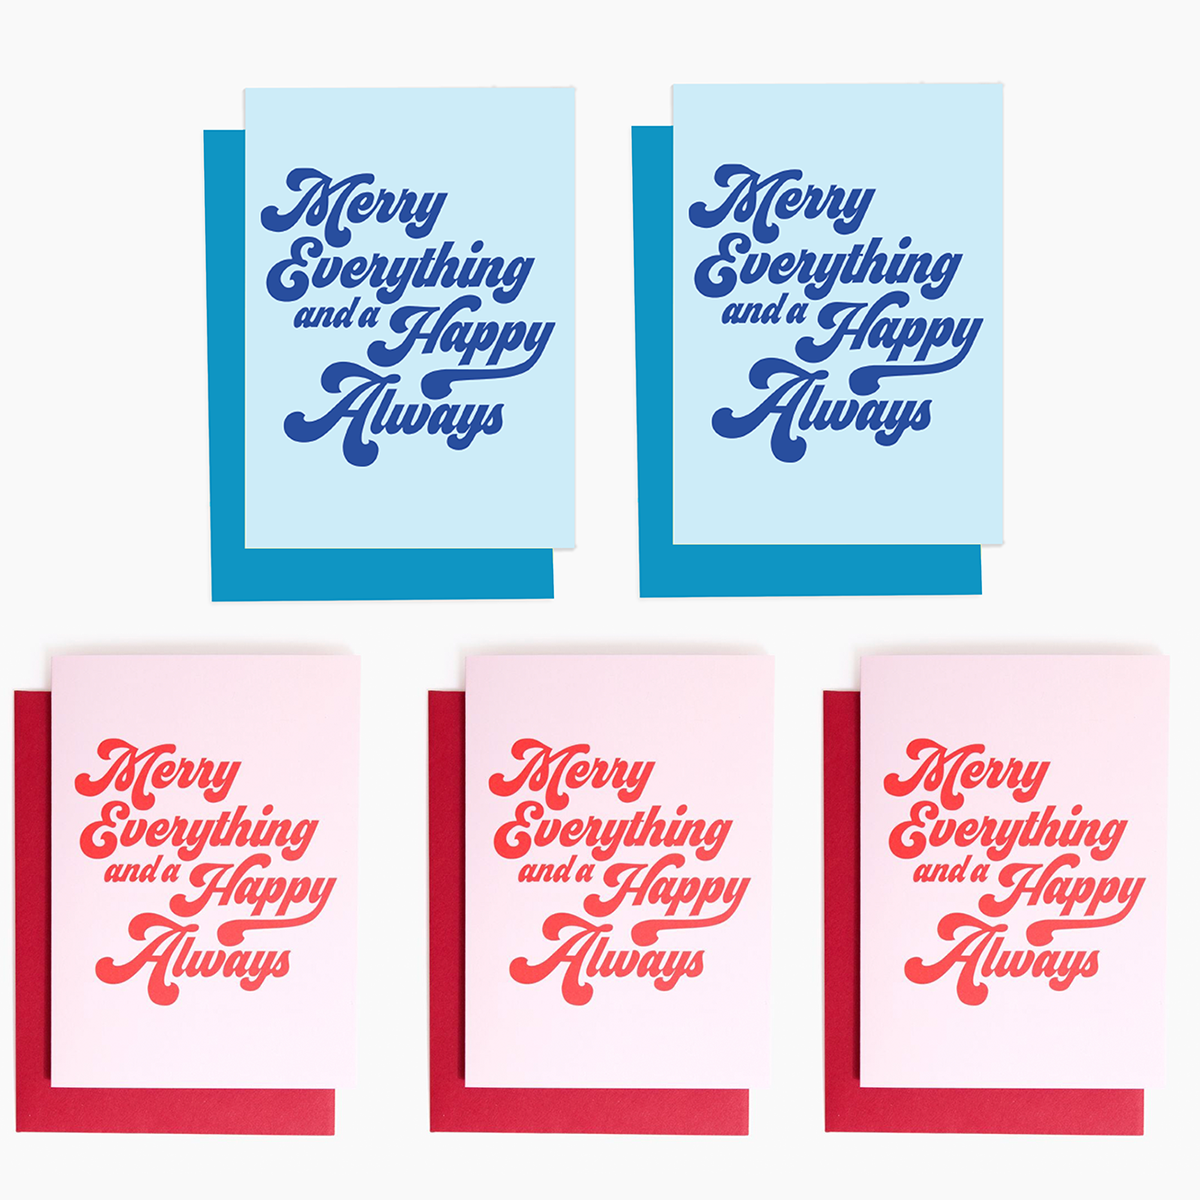 Merry Everything and a Happy Always Greeting Card Set of 5